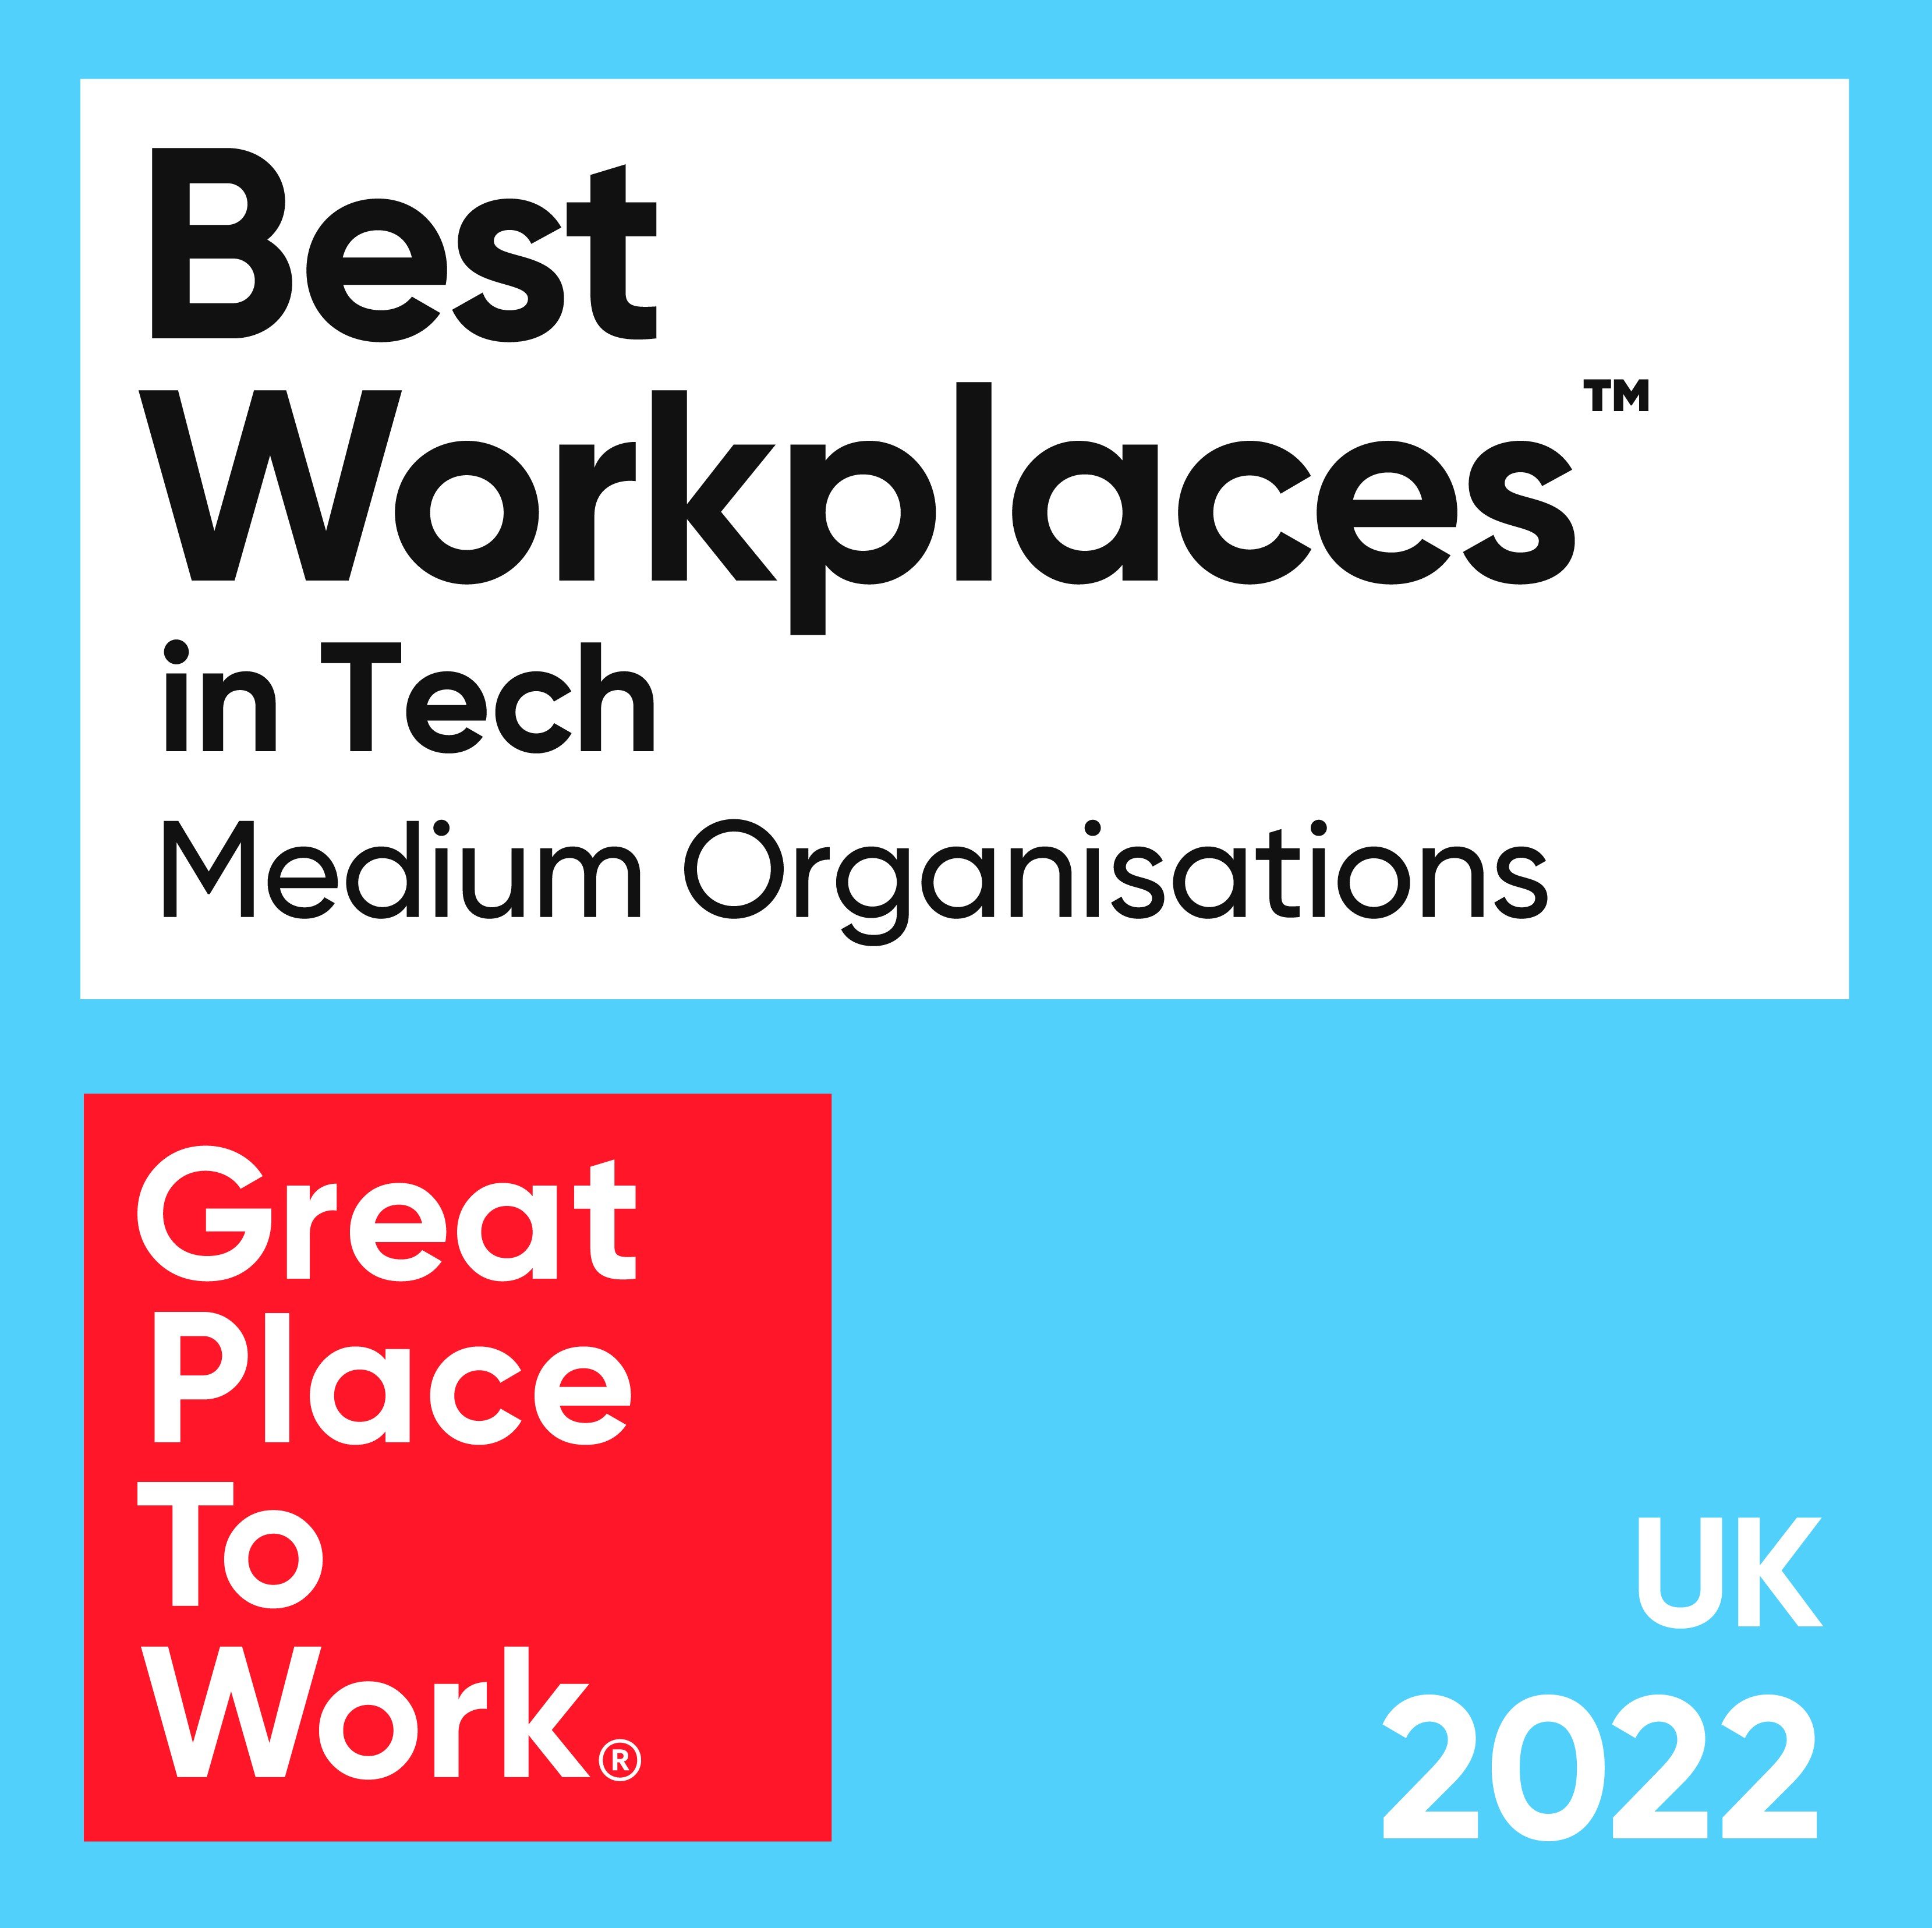 Best Workplaces for Technology: UK 2022